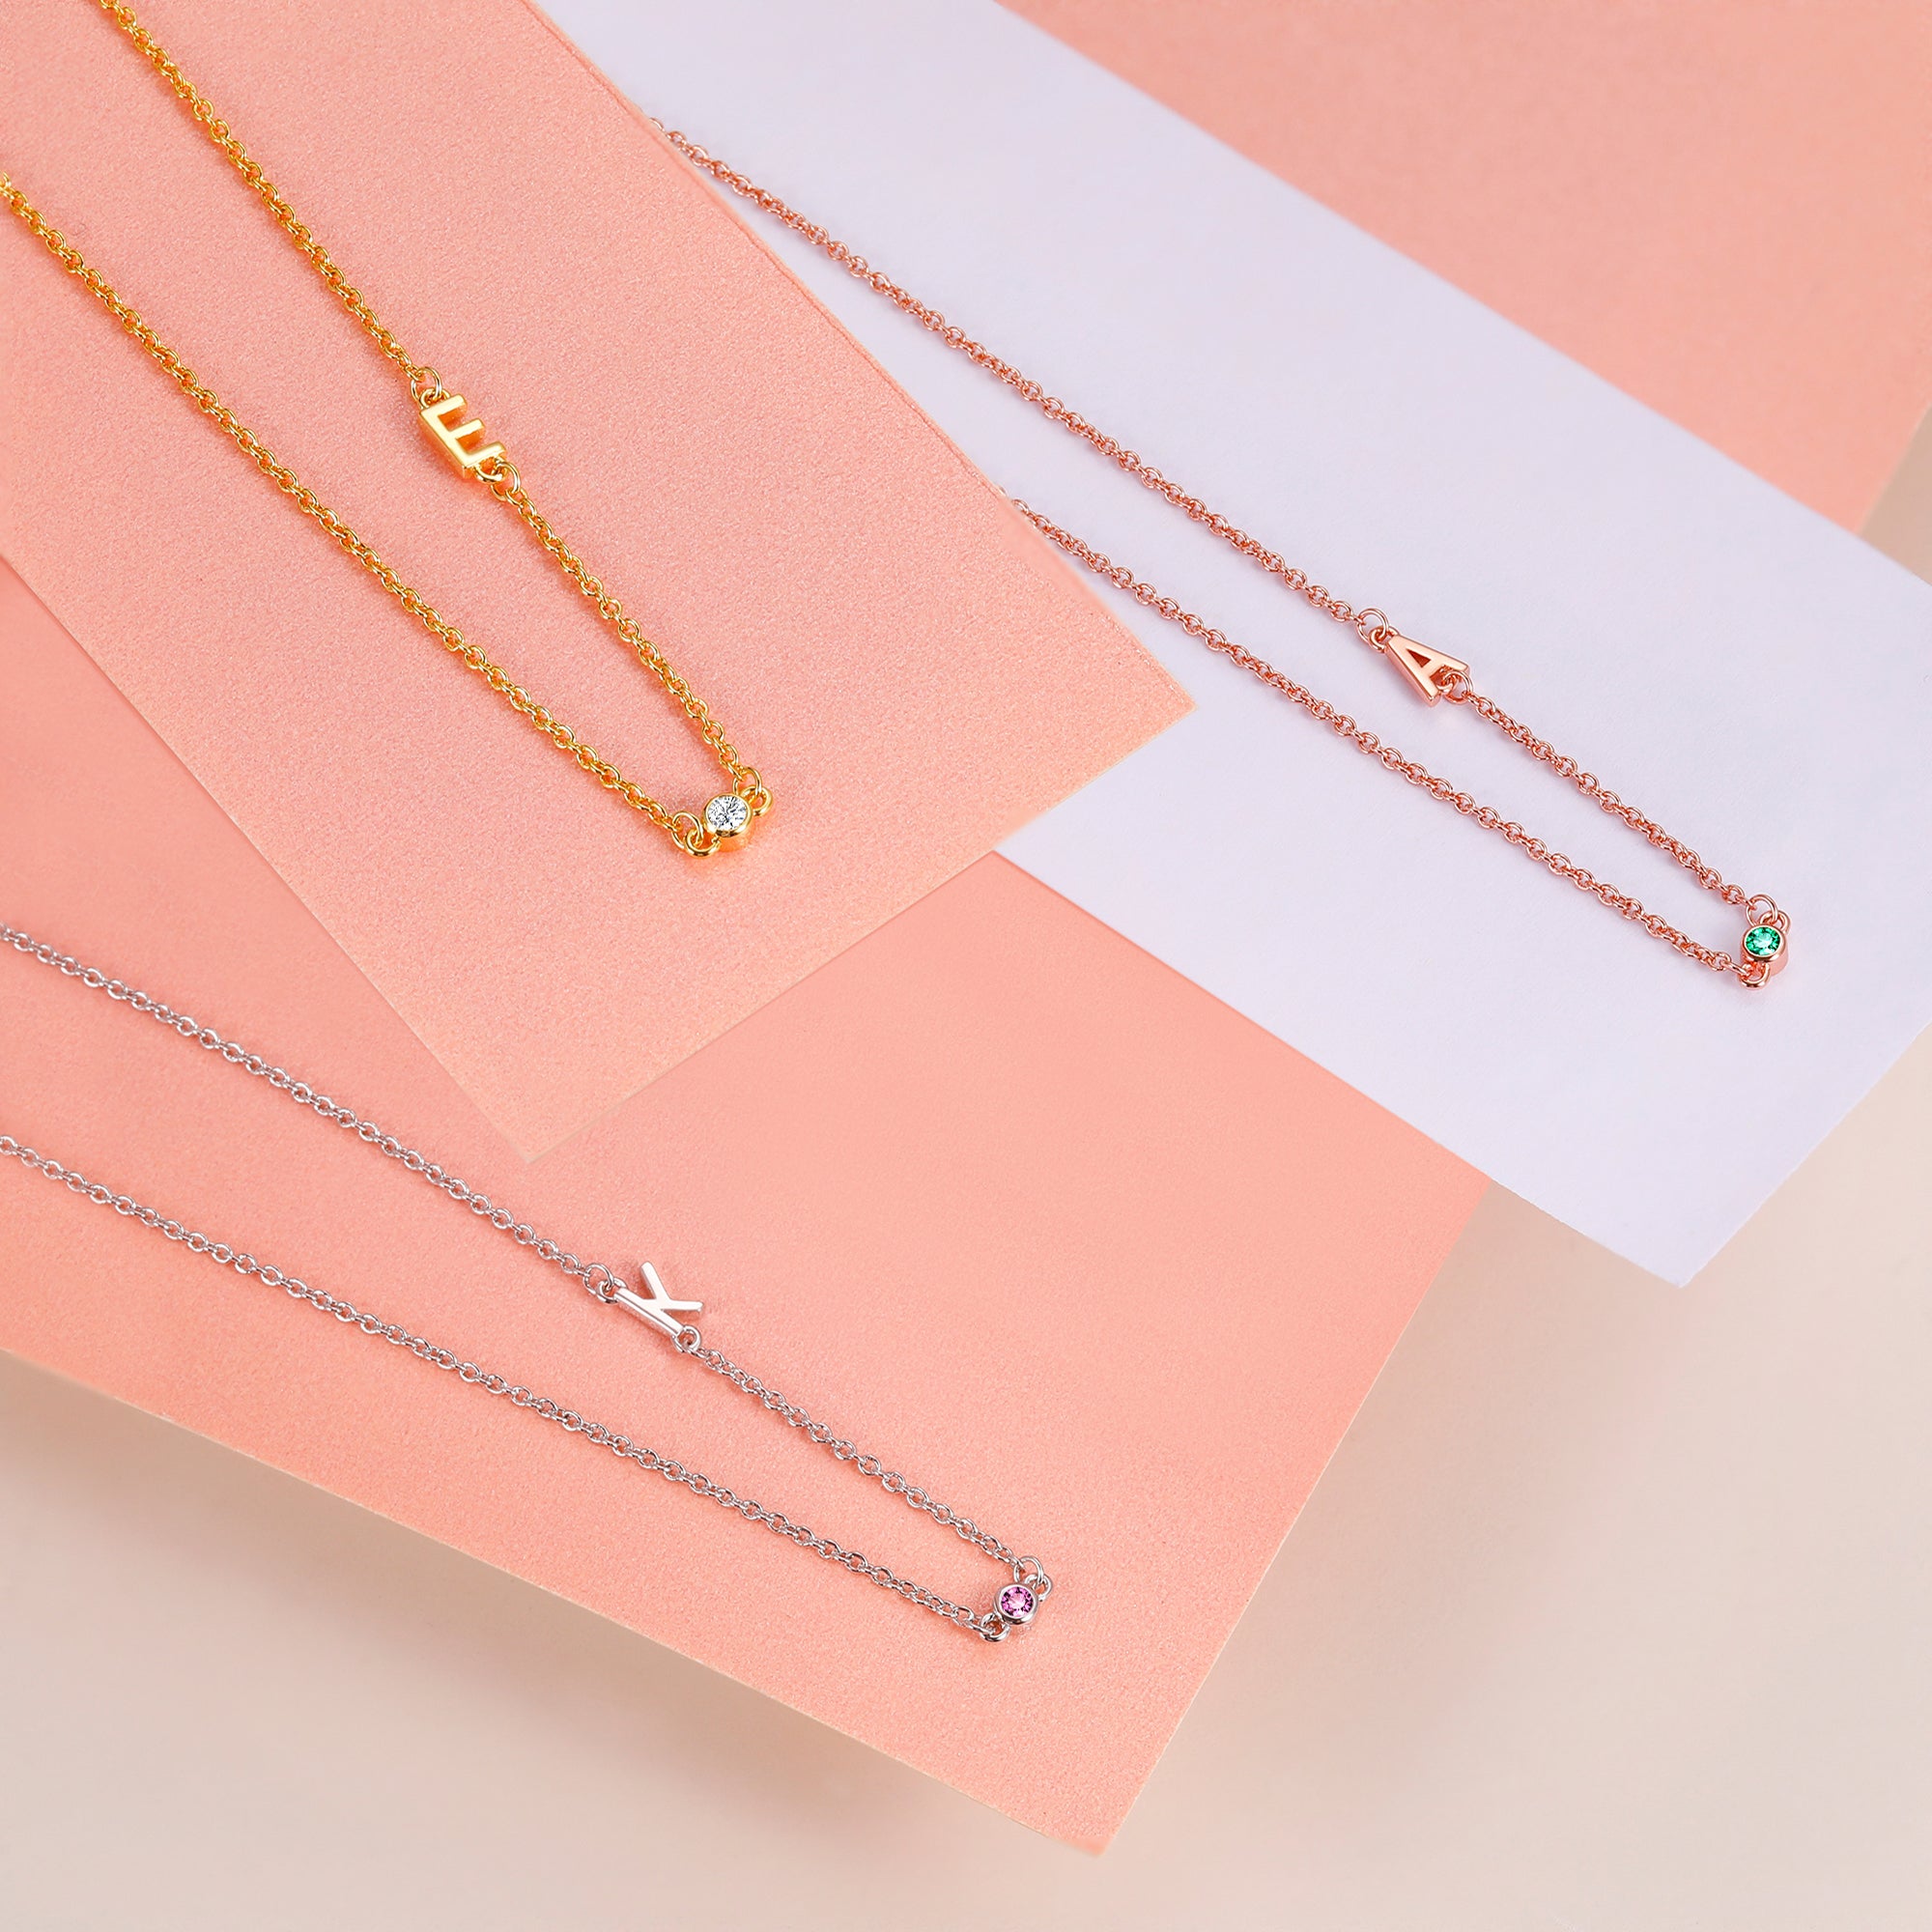 necklace for women, initial necklace for women, gold initial necklace